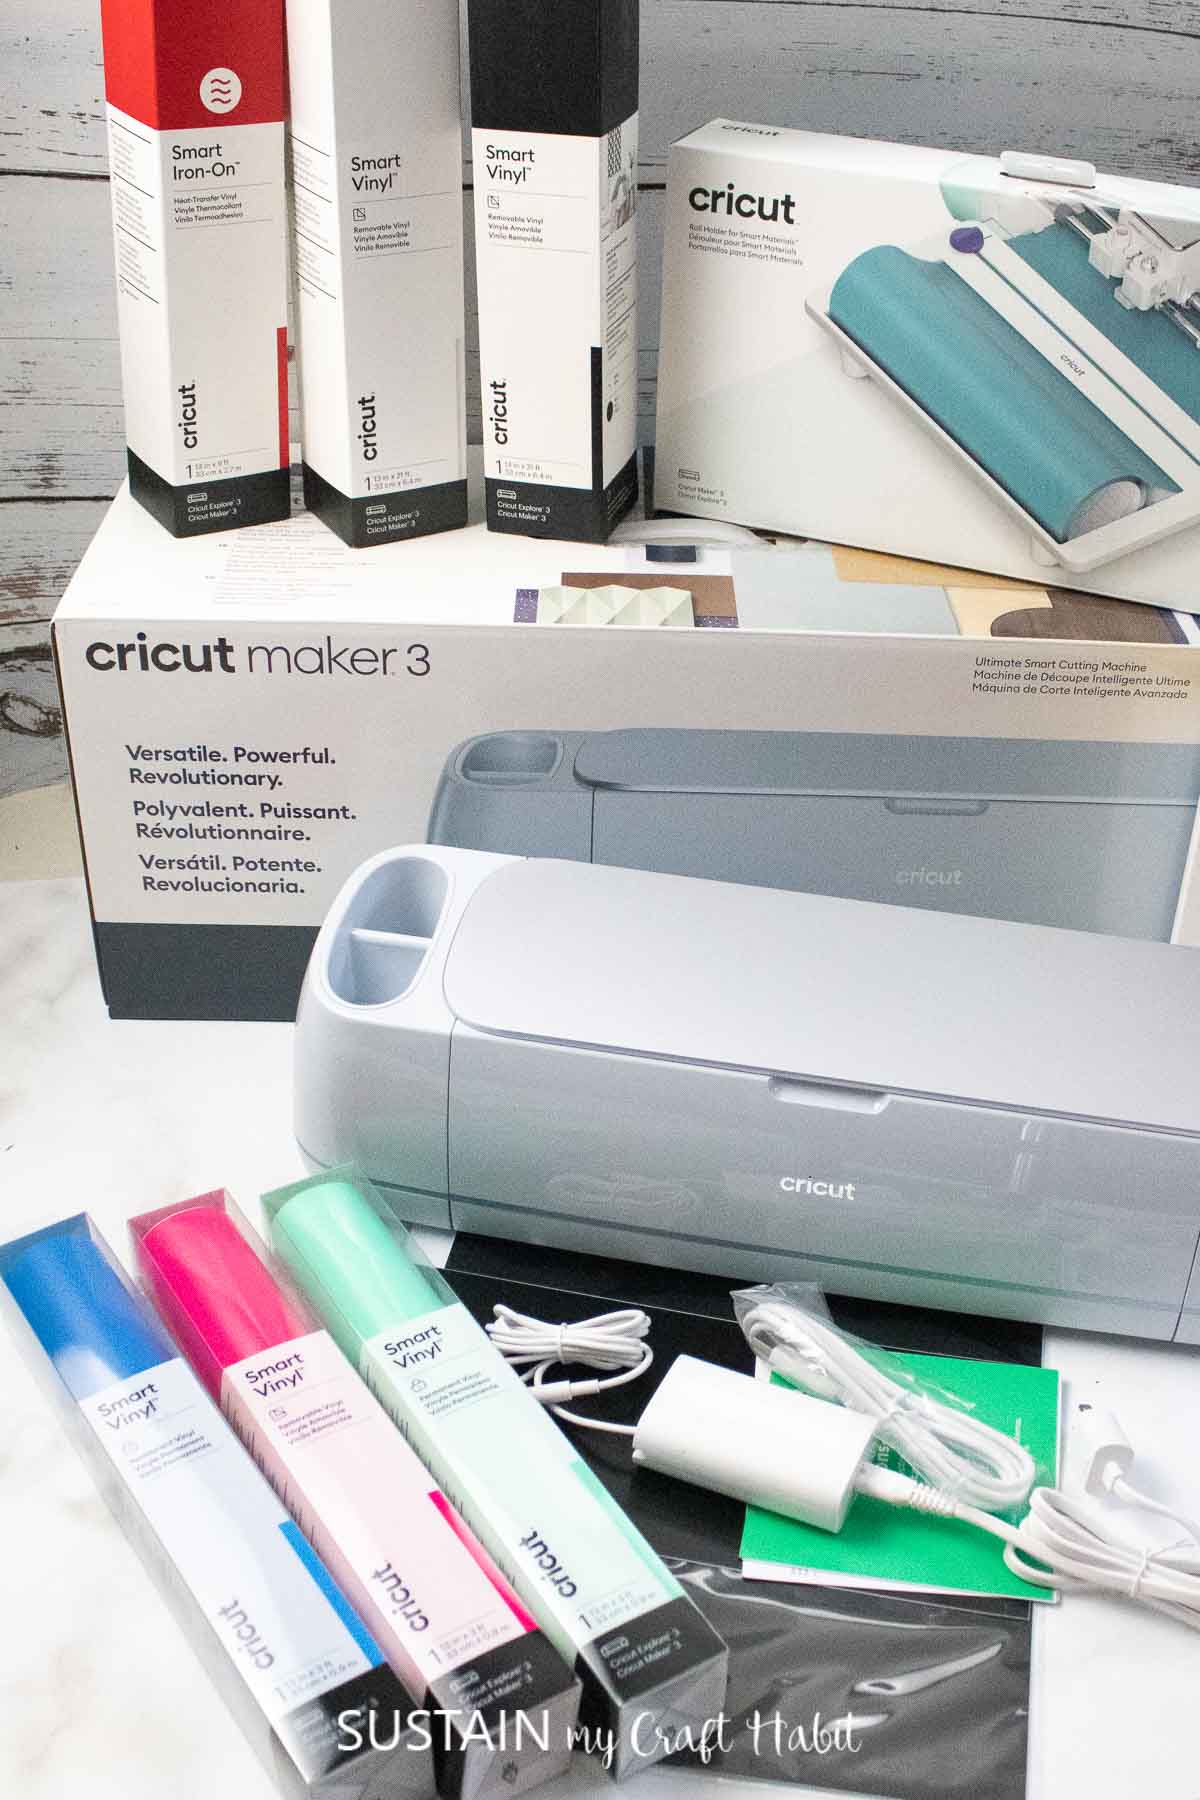 Cricut Maker 3 + Smart Materials Full Review ⭐️ Everything you